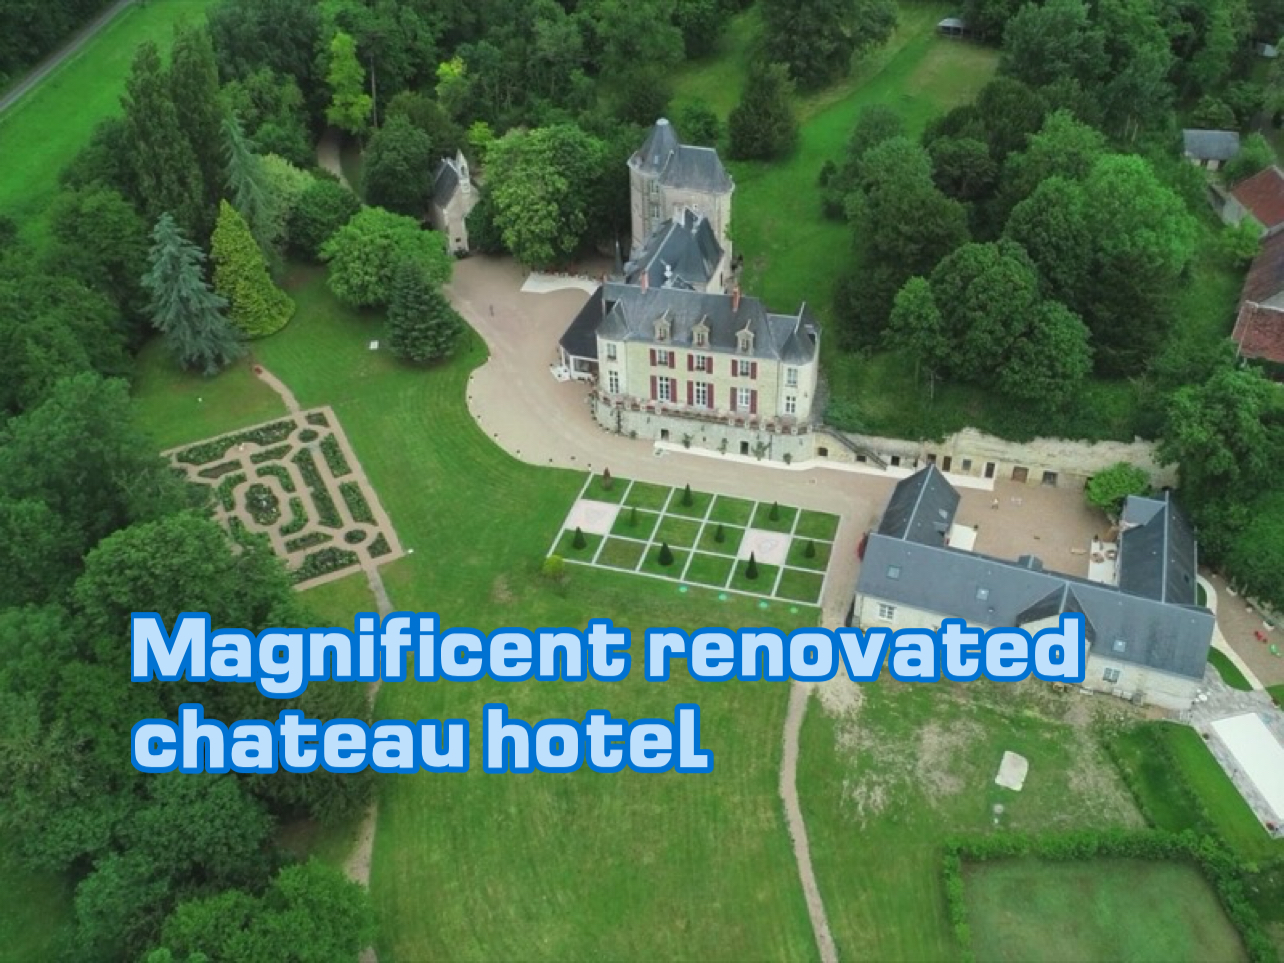 Magnificent renovated chateau